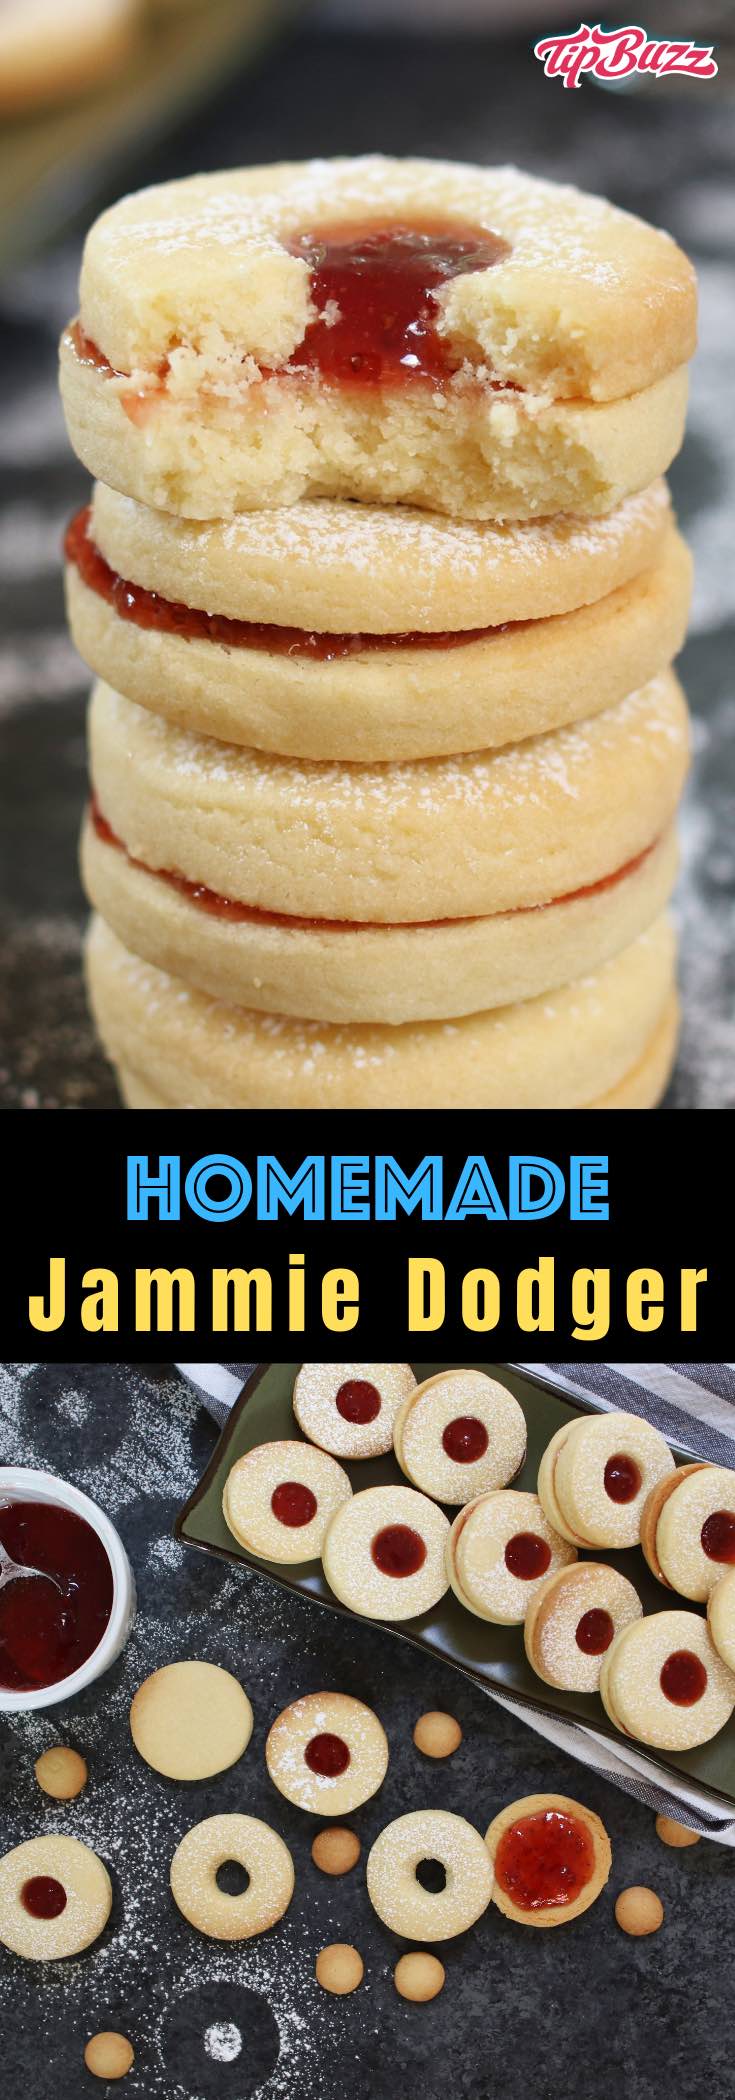 These soft and buttery homemade Jammie Dodgers are a UK staple! They are two shortbread biscuits sandwiched together with fruity jam such as strawberry or raspberry. I’ve packed all my tips in this post so that you can make them easily at home!